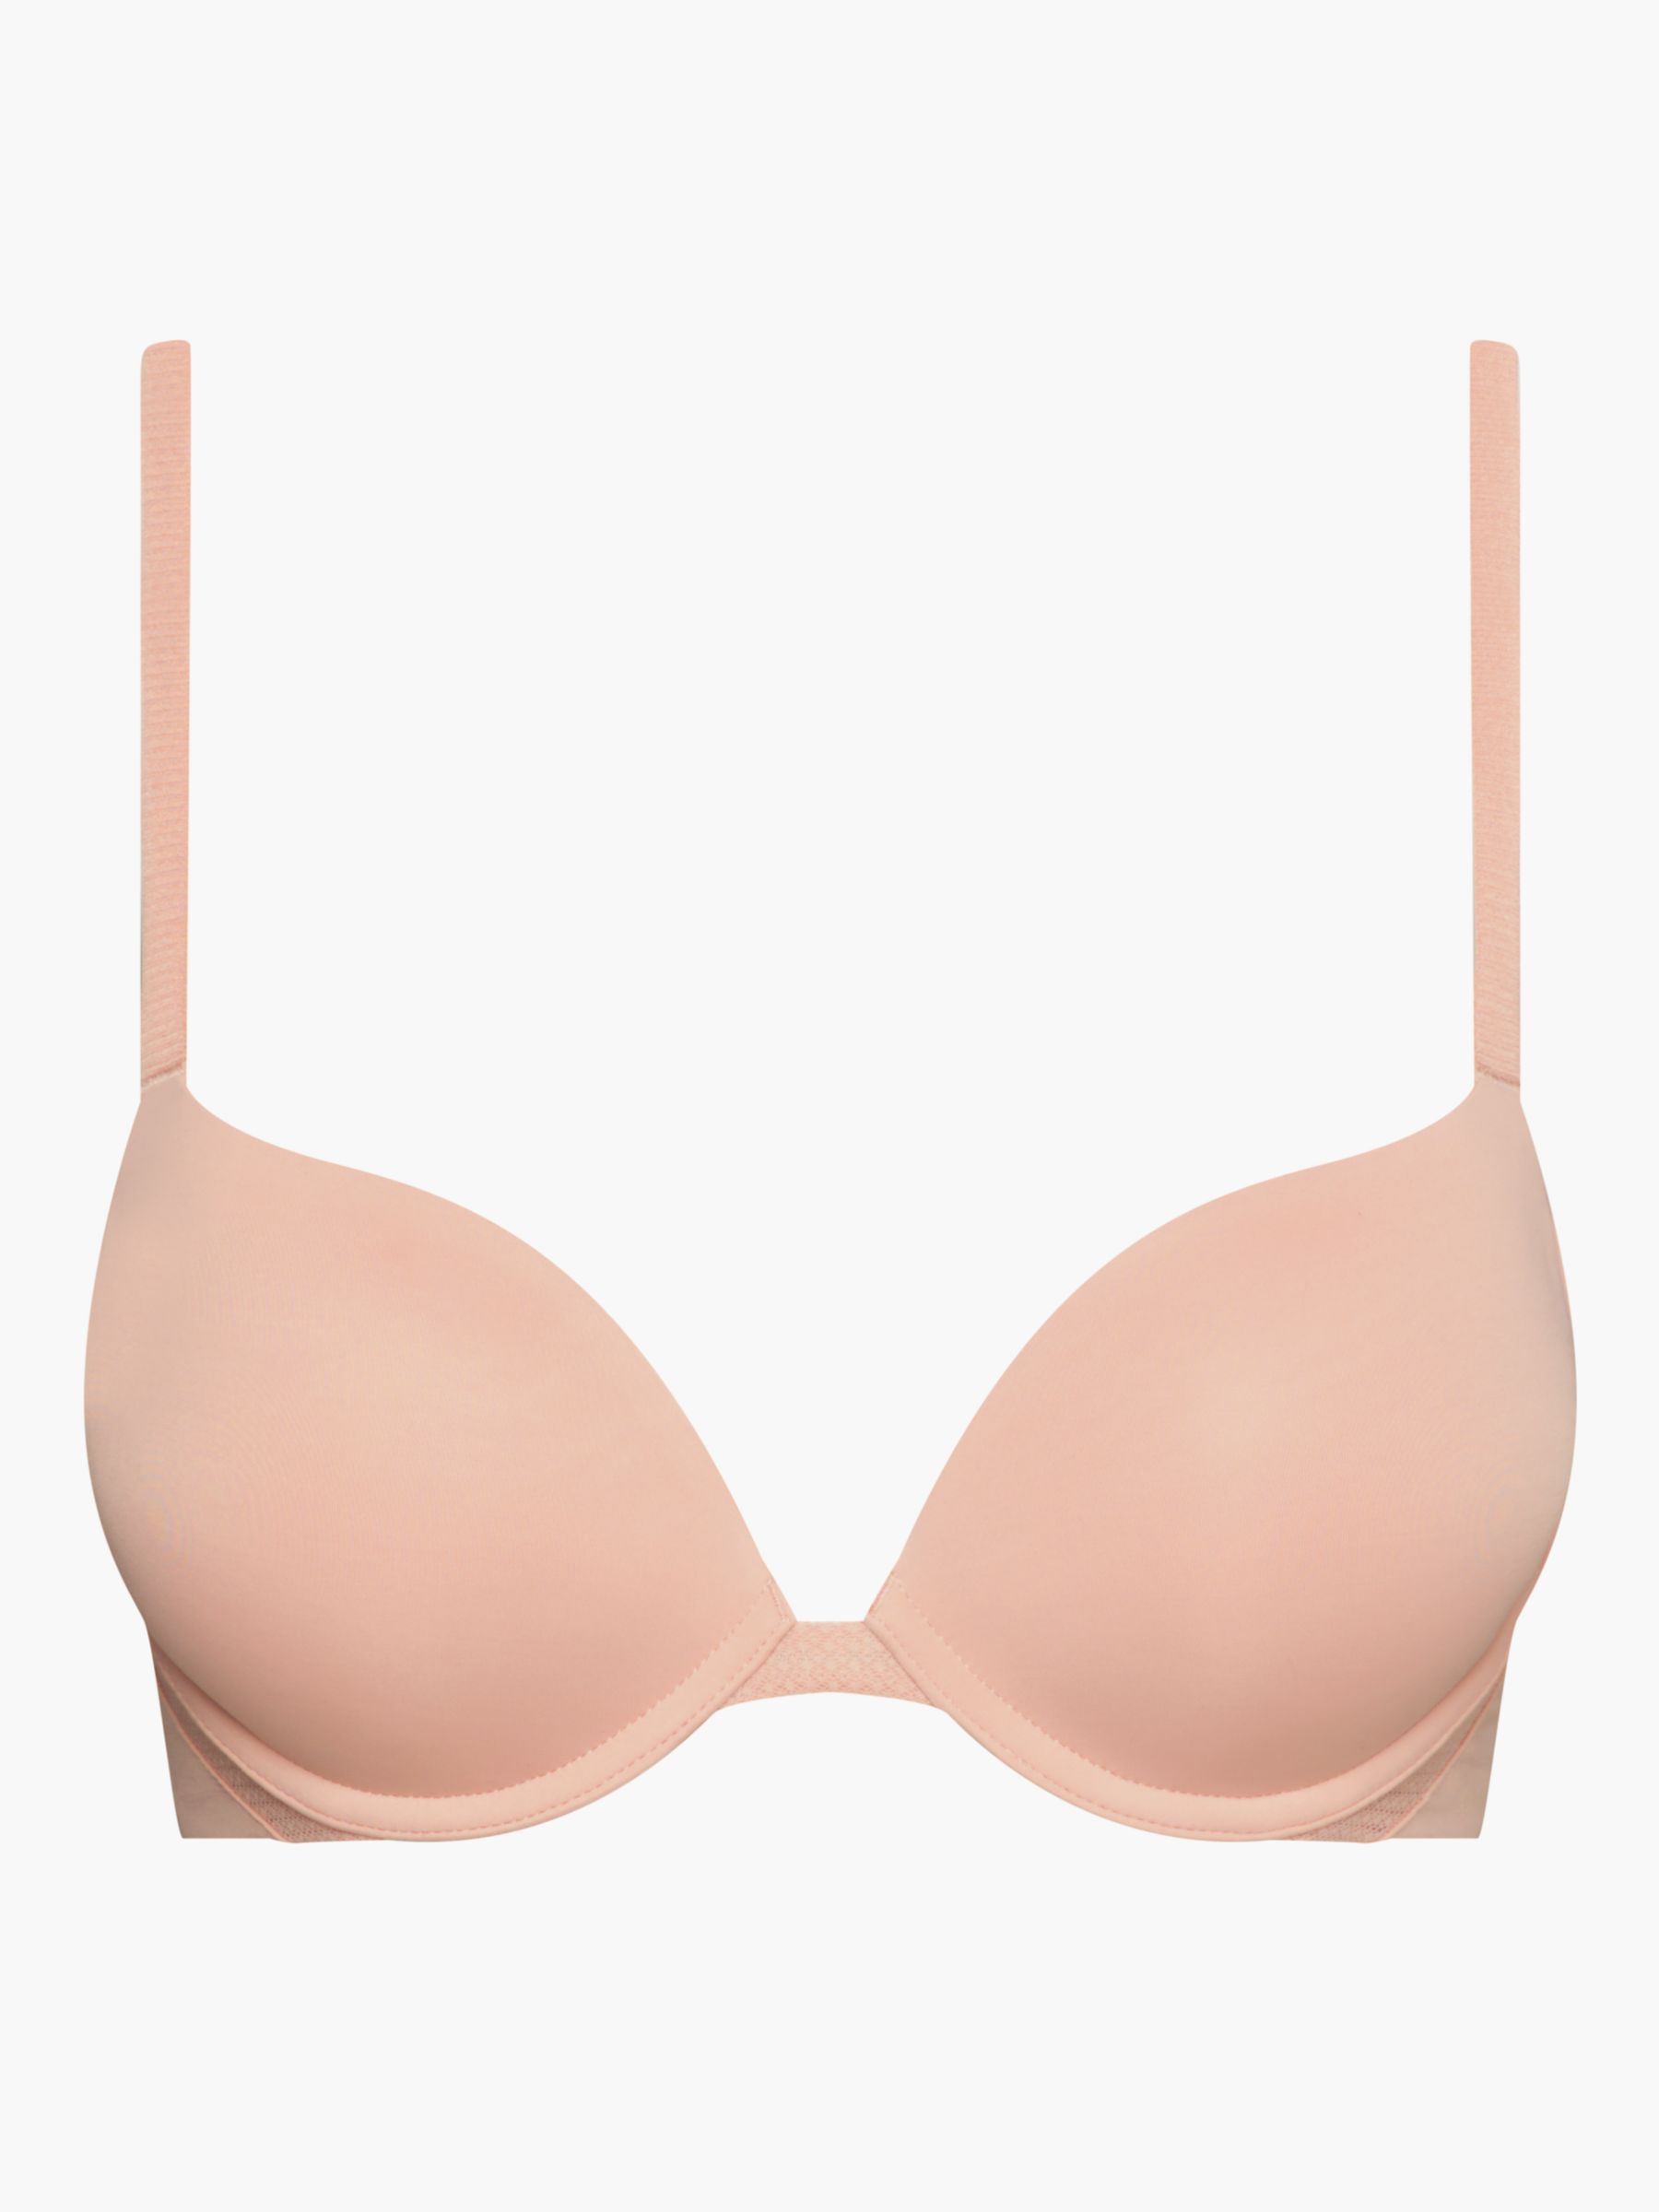 Calvin Klein Perfectly Fit Flex Plunge Push-Up Bra, Stone Grey at